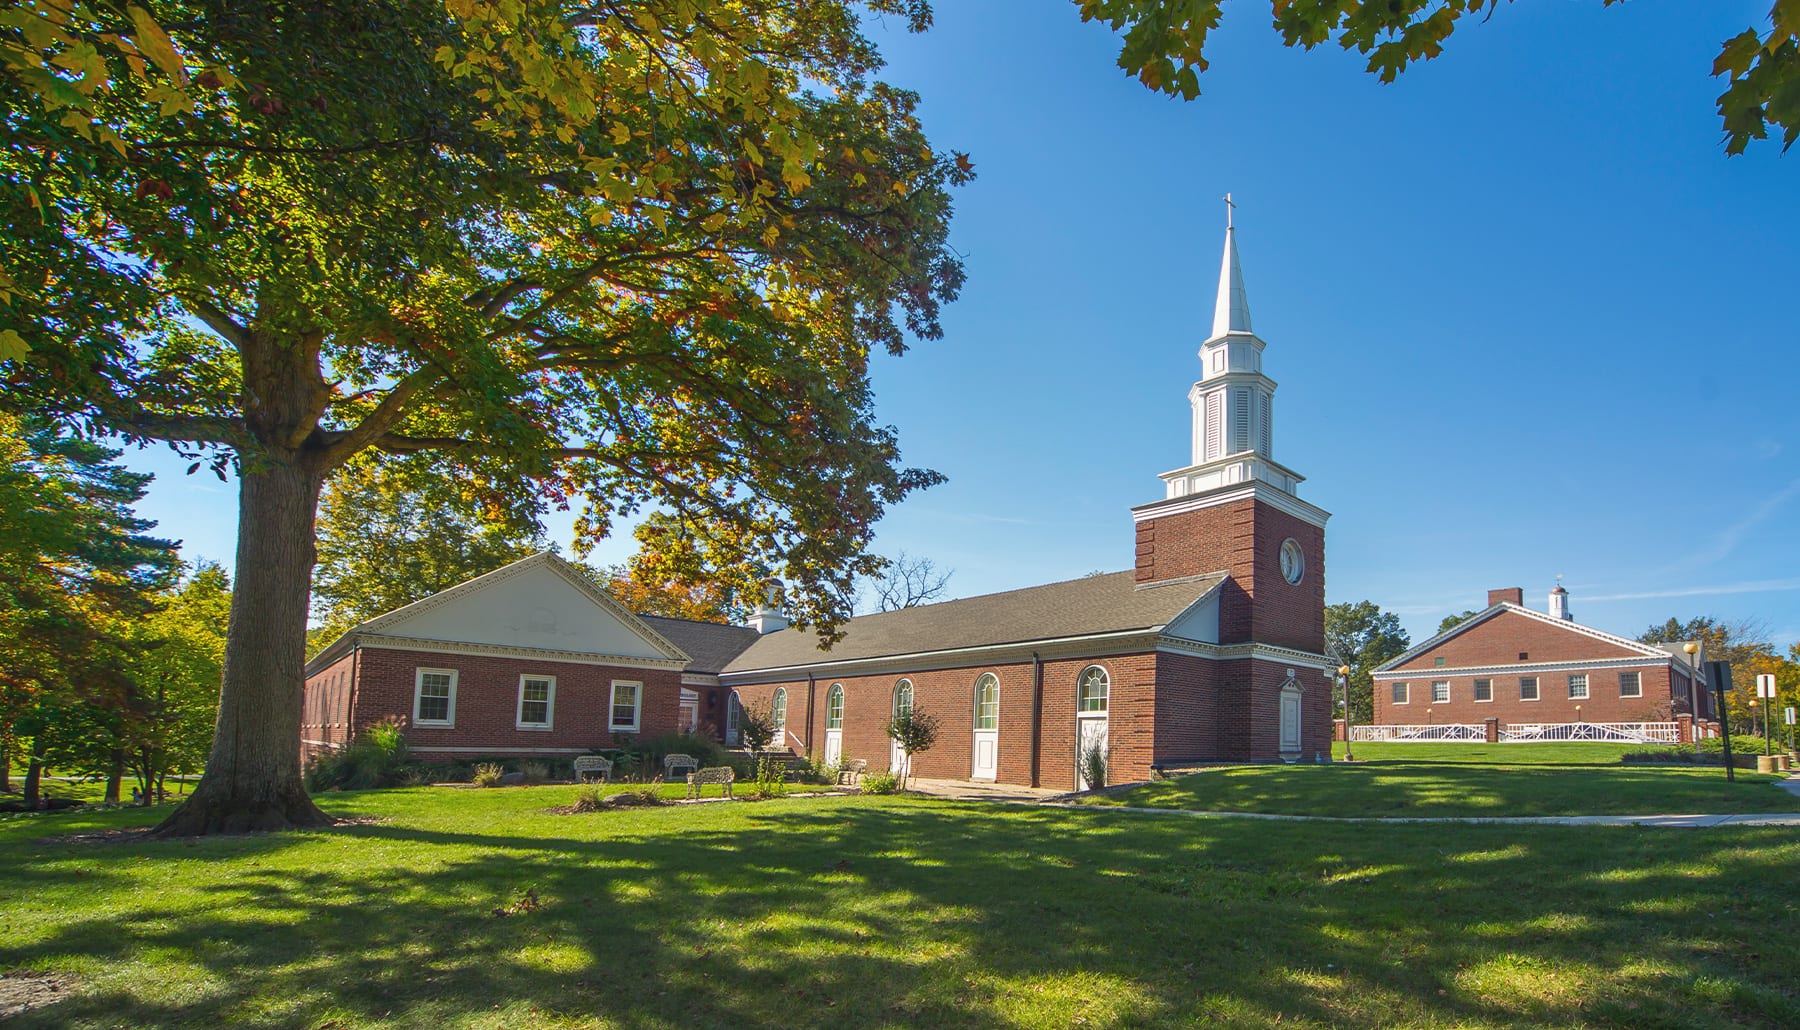 panoramic view of the Miller Chapel on a sunny day.